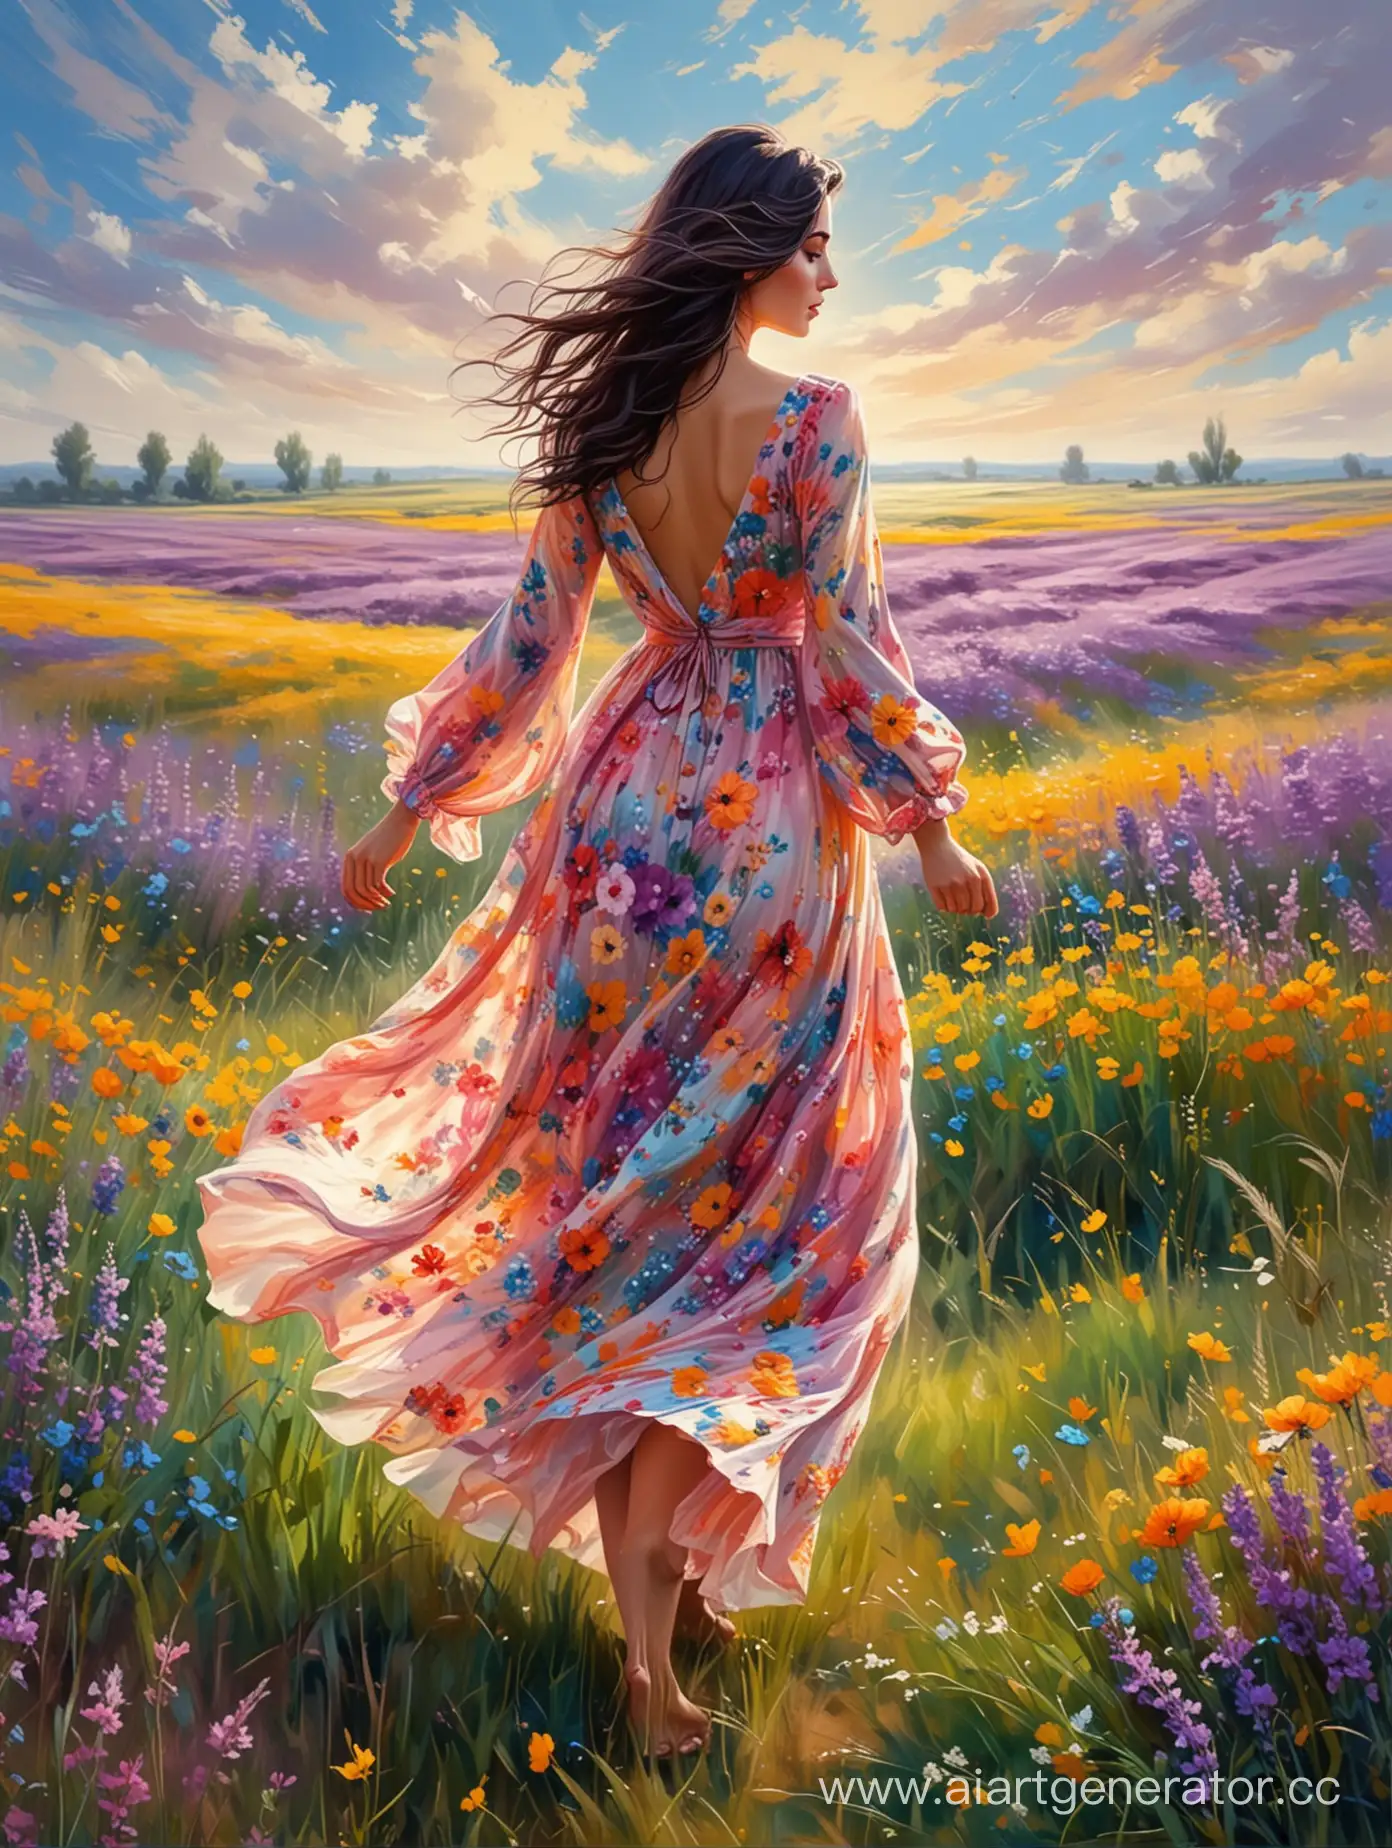 Graceful-Woman-in-Floral-Field-DarkHaired-Beauty-Amidst-Blooms